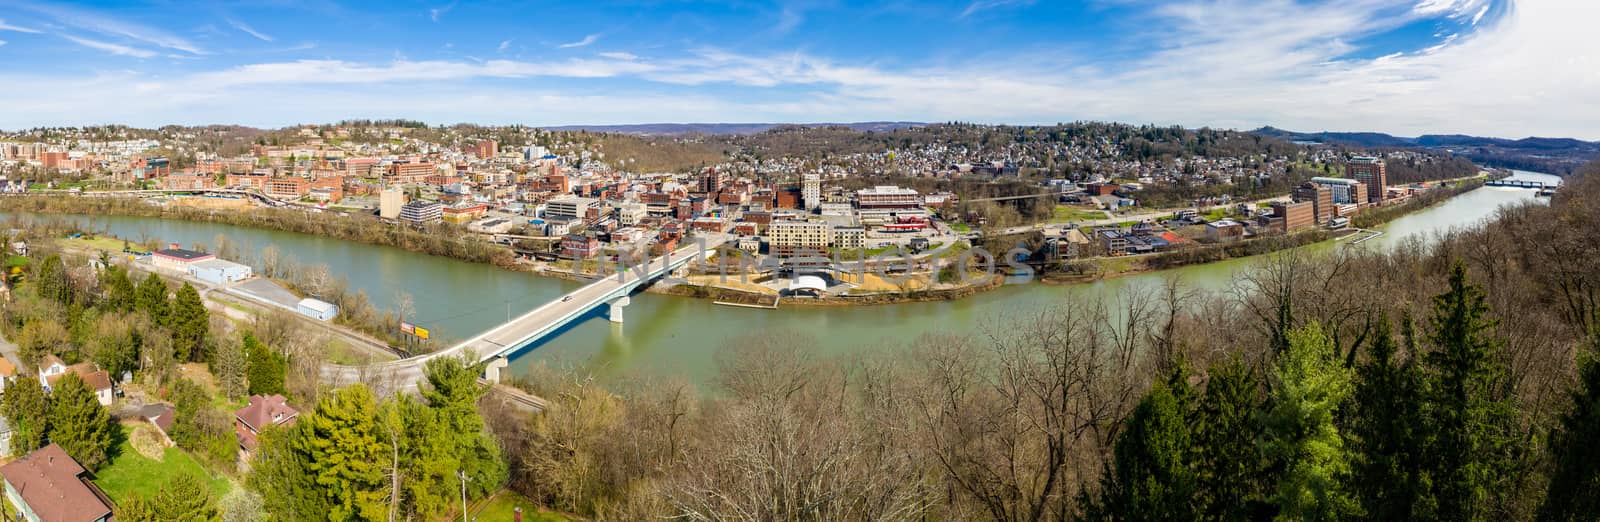 Overview of City of Morgantown WV from an aerial perspective of a drone by steheap